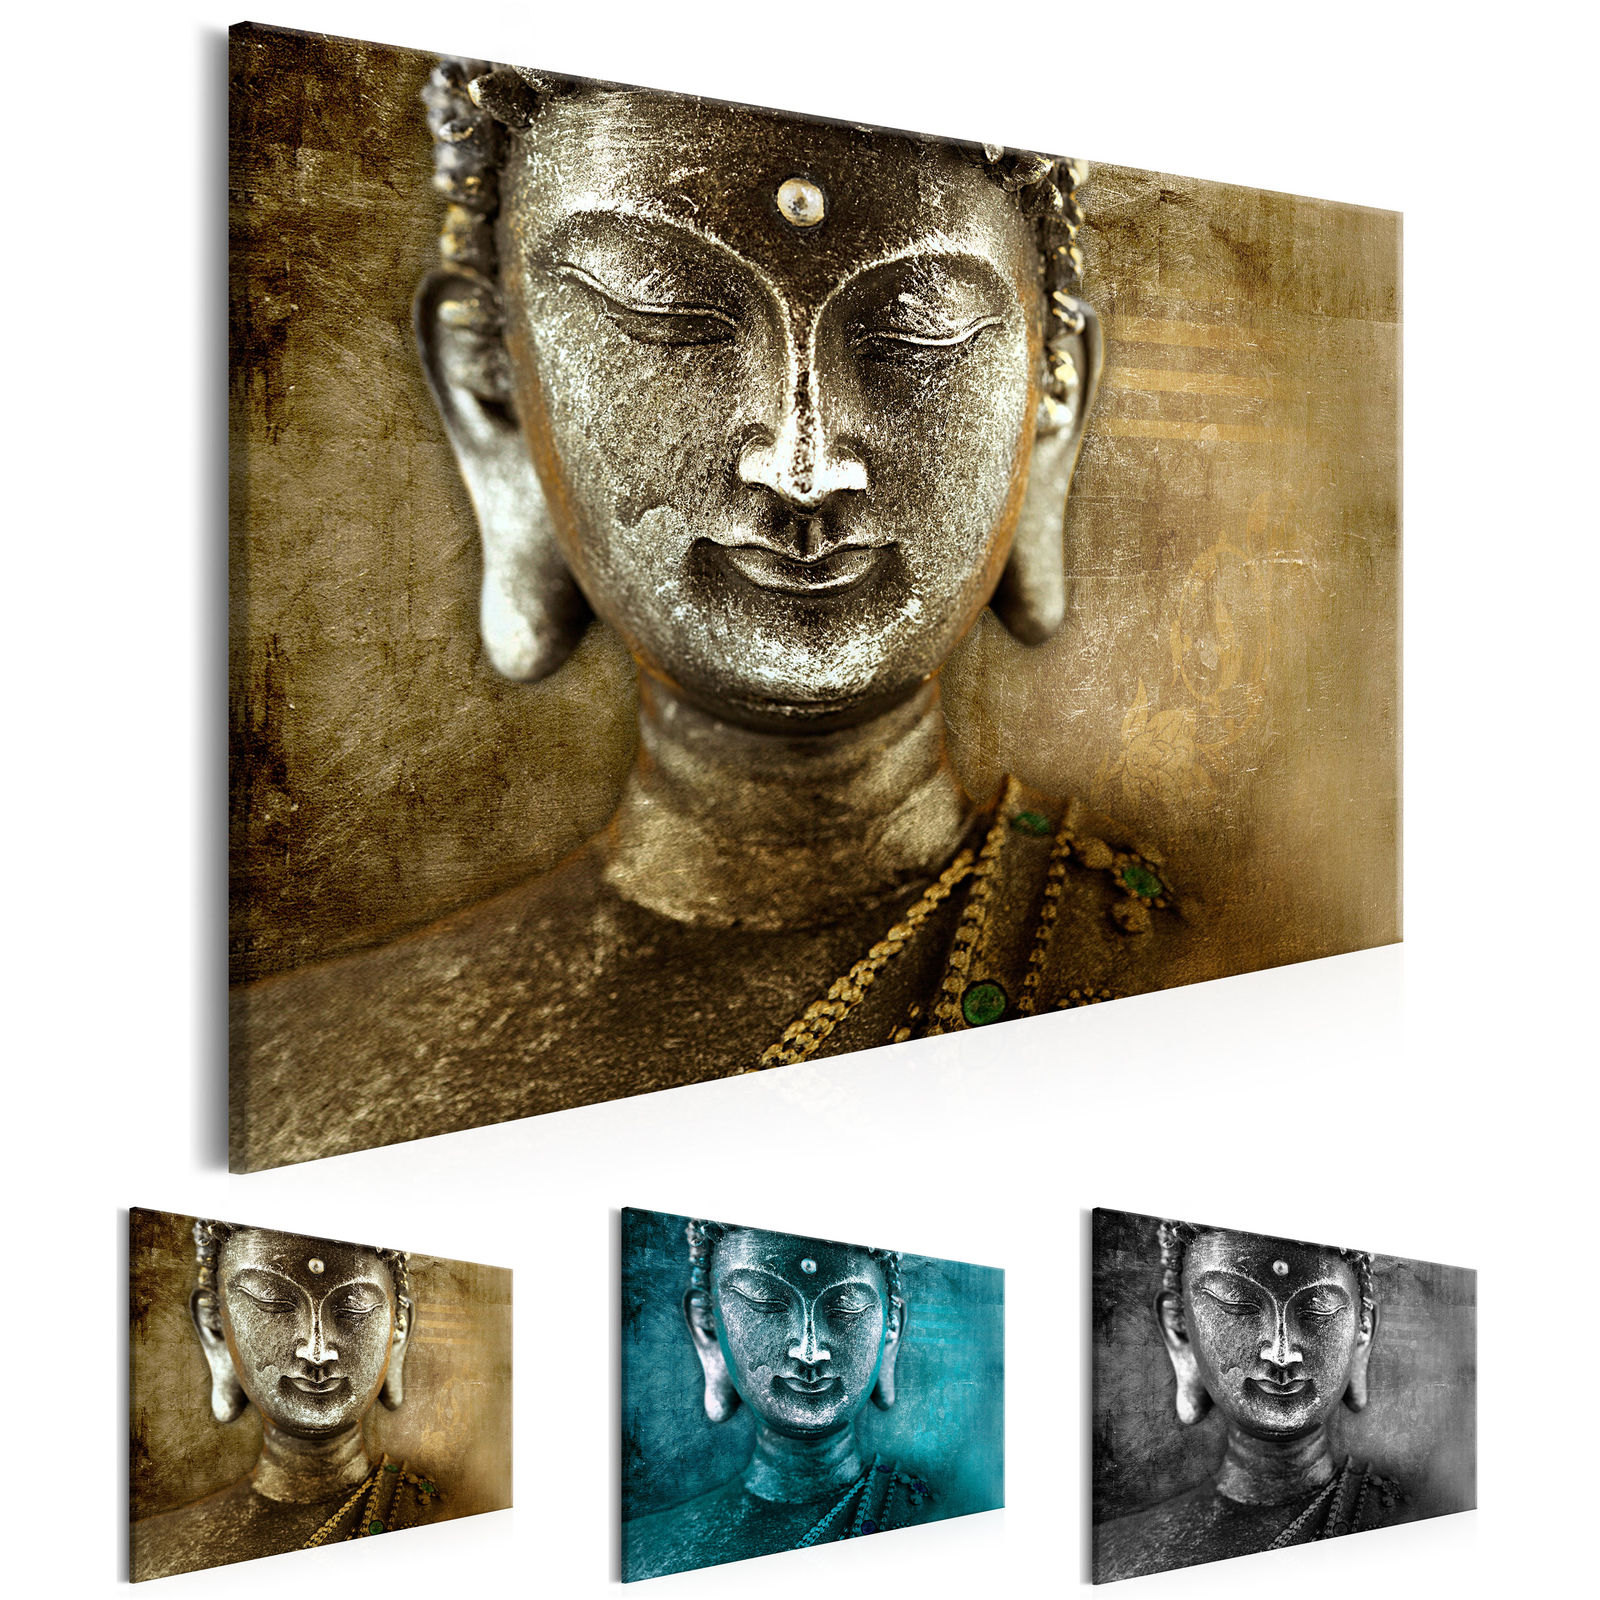 

Unframed 1 Panel Large HD Printed Canvas Print Painting Buddha Home Decoration Wall Pictures for Living Room Wall Art on Canvas(Multicolor)